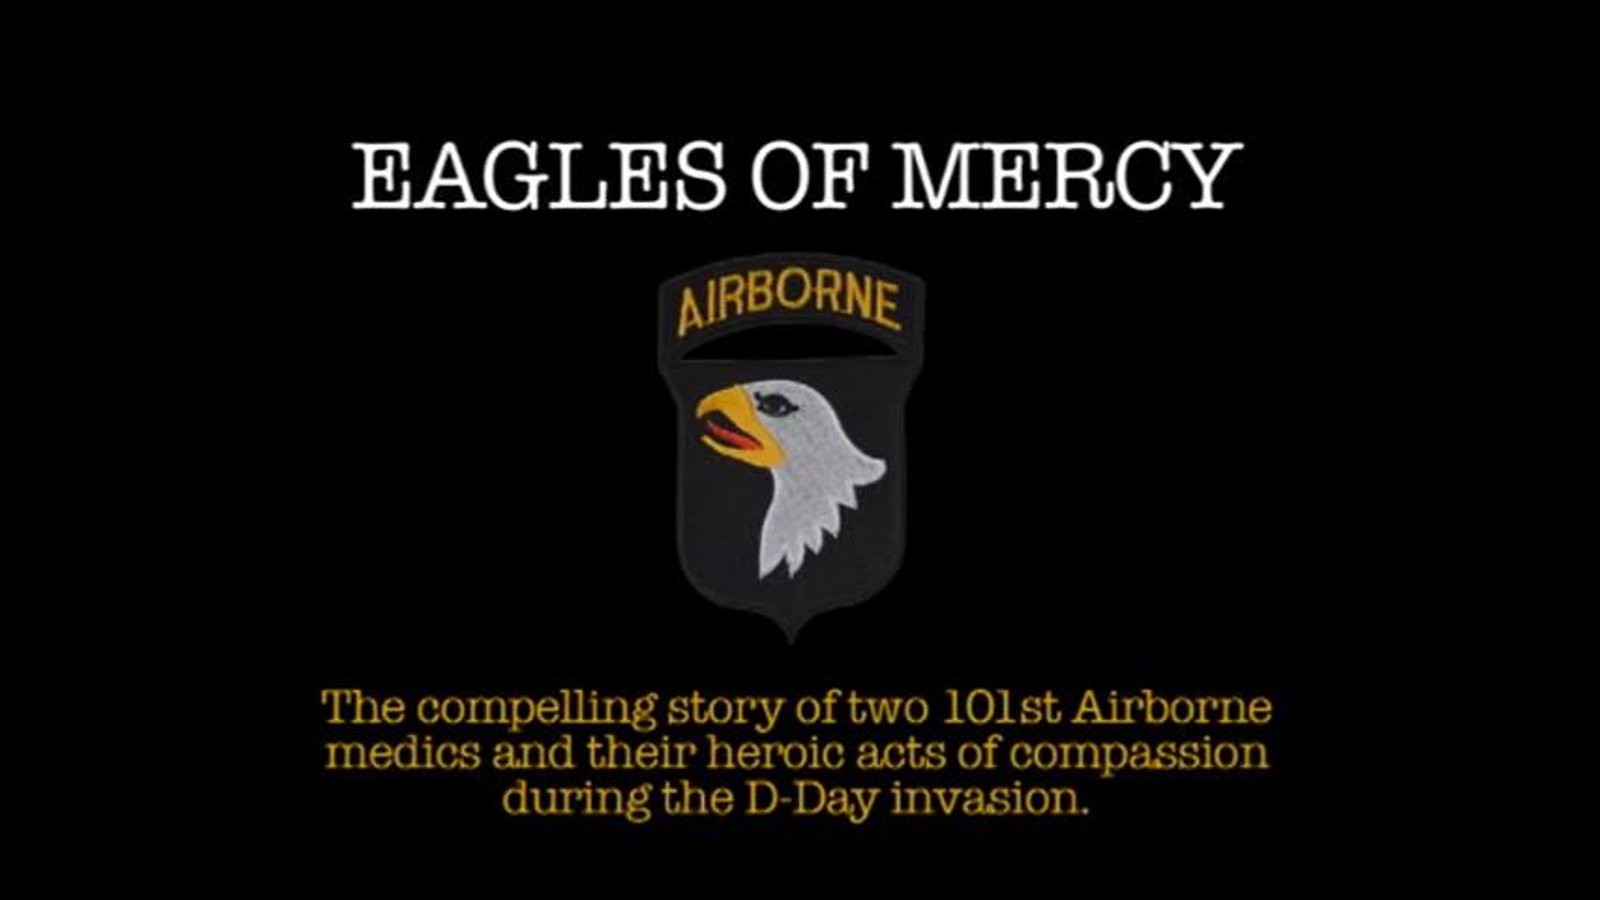 Eagles of Mercy - The Compelling Story of Two Airborne Medics